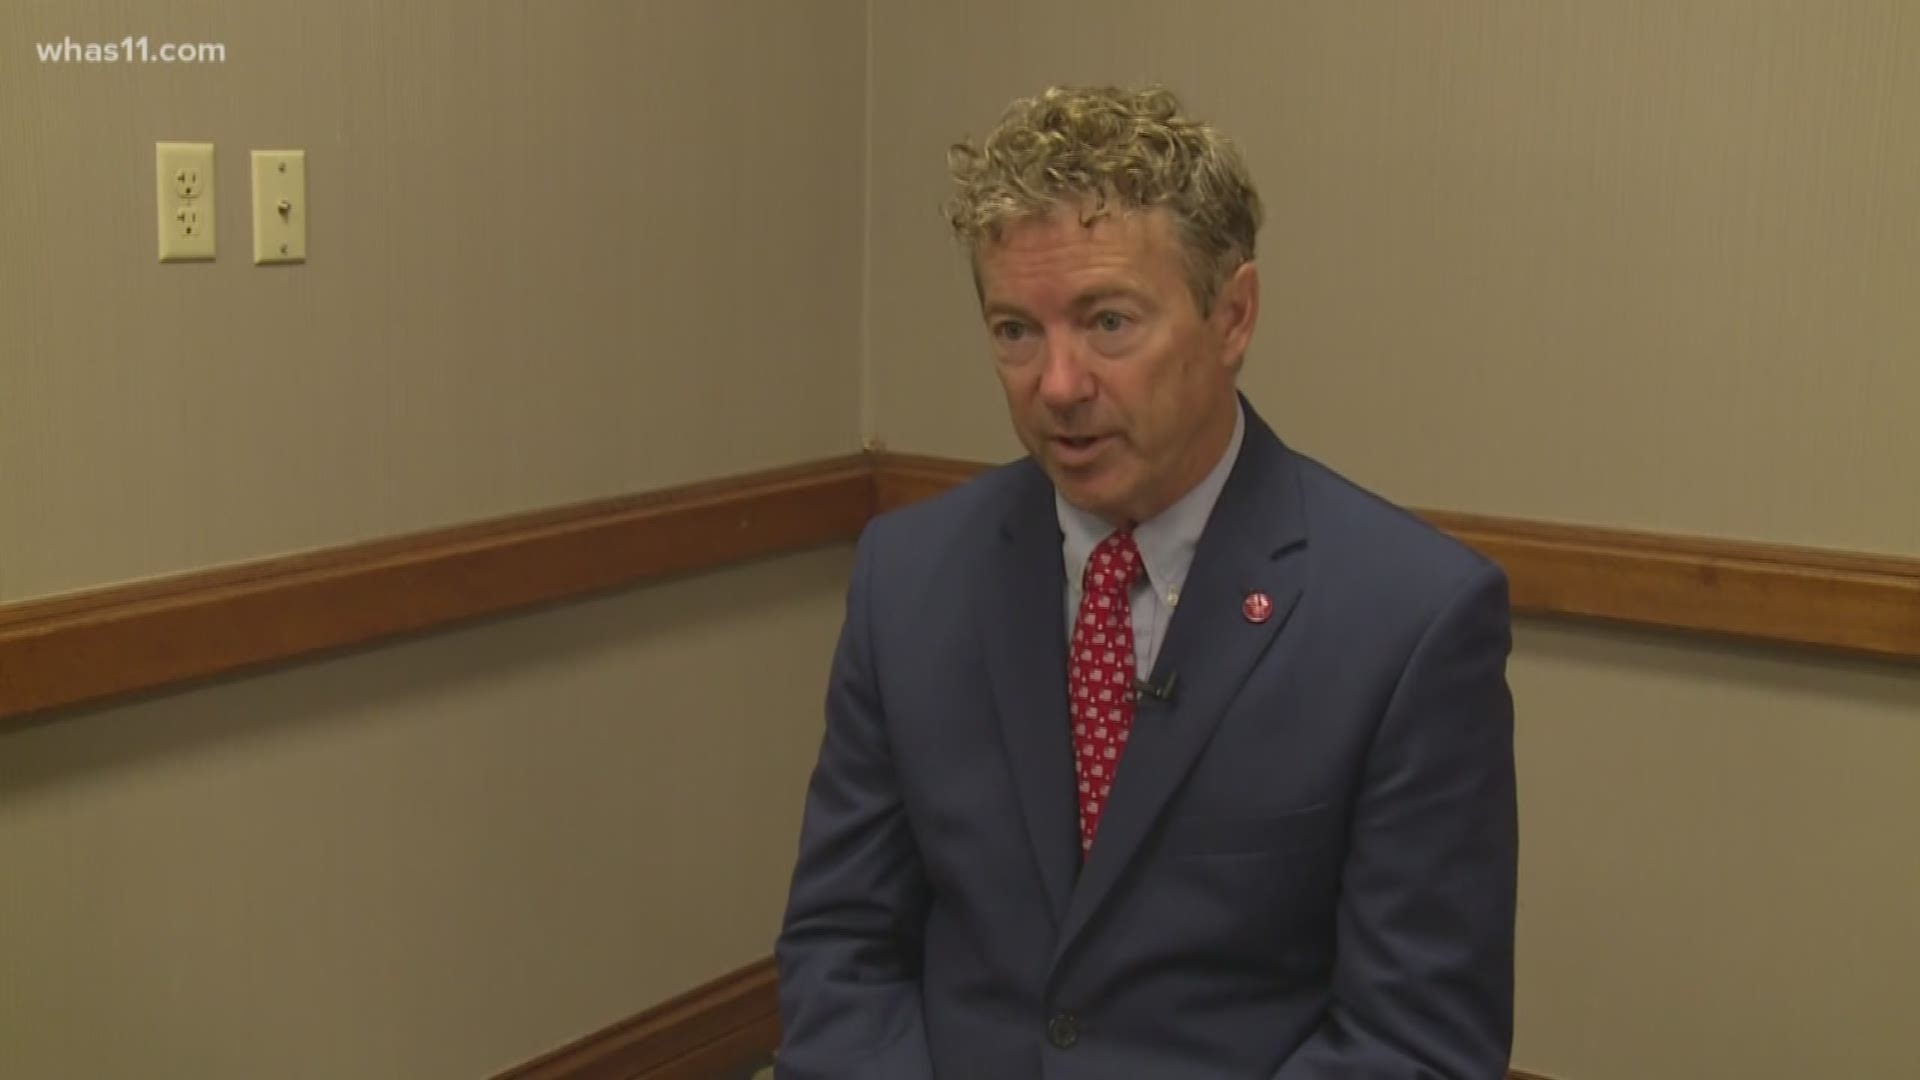 Come to us before you act, that's the advice from Senator Rand Paul to President Donald Trump as tensions mount with Iran.